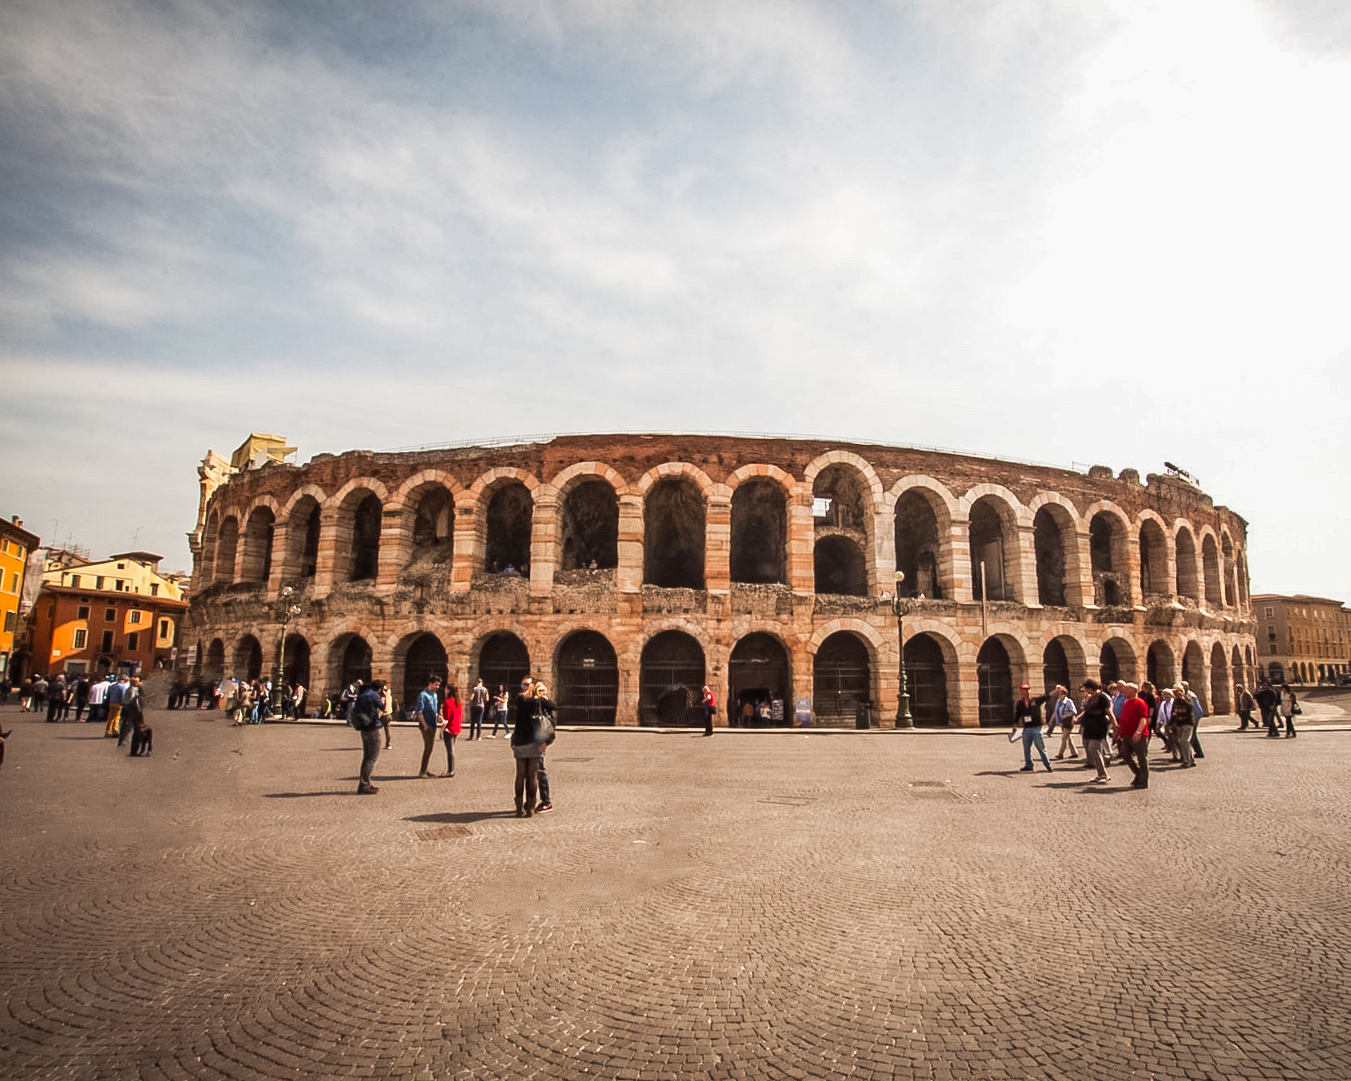 12 Best Things to do in Verona: The Arena Verona amphitheater